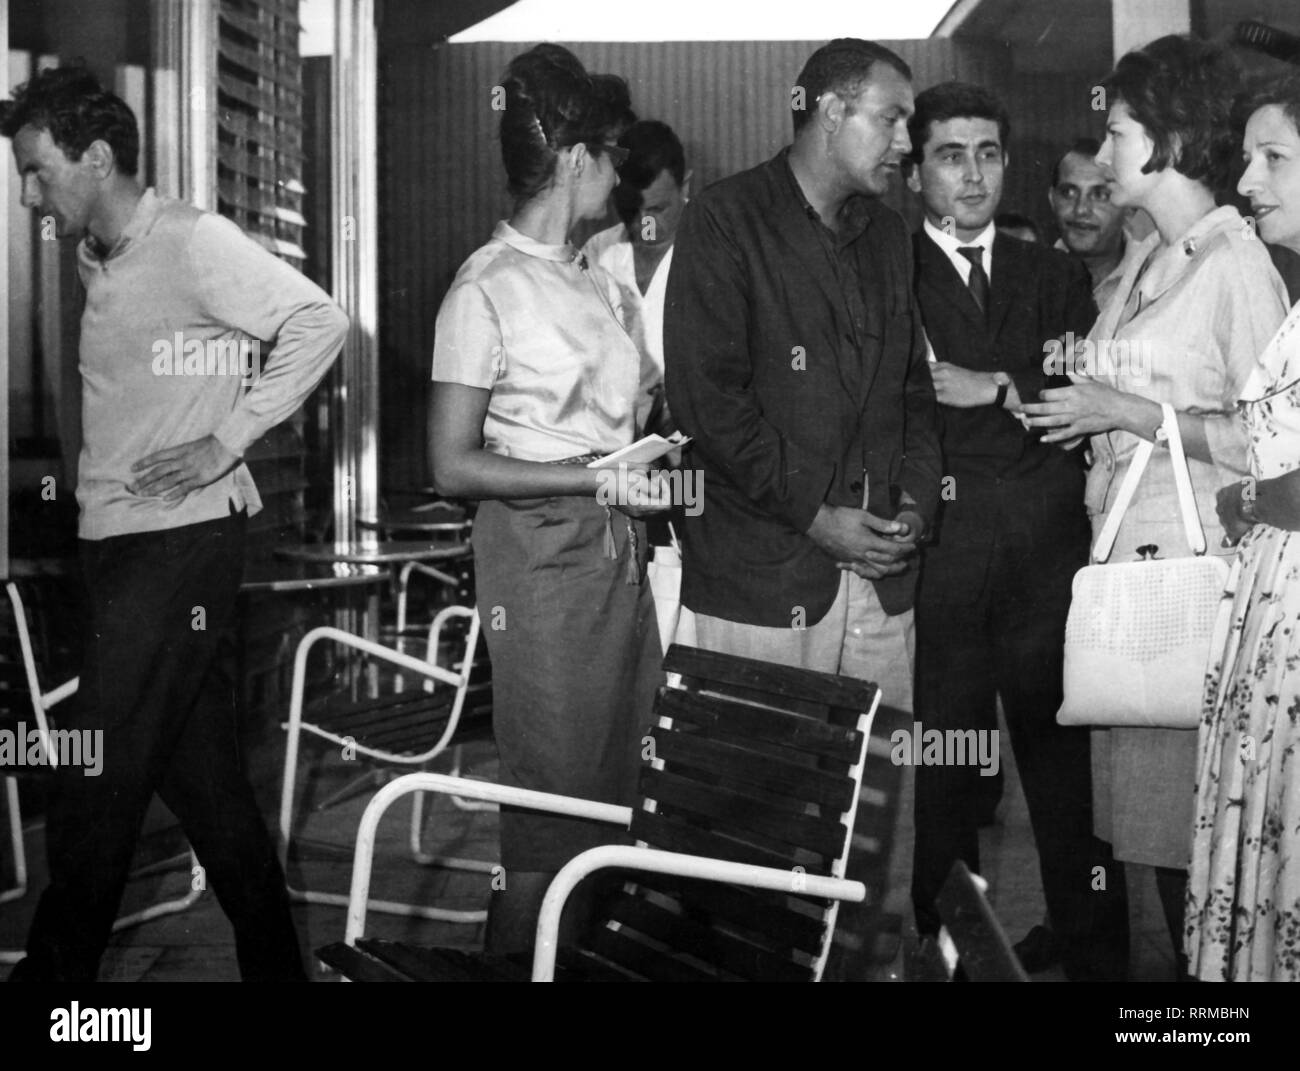 Soraya, 22.6.1932 - 25.10.2001, Empress of Persia 12.2.1951 - 6.4.1958, half length, in conversation with fans, Turkey, September 1963, left: actor Maximilian Schell, Additional-Rights-Clearance-Info-Not-Available Stock Photo